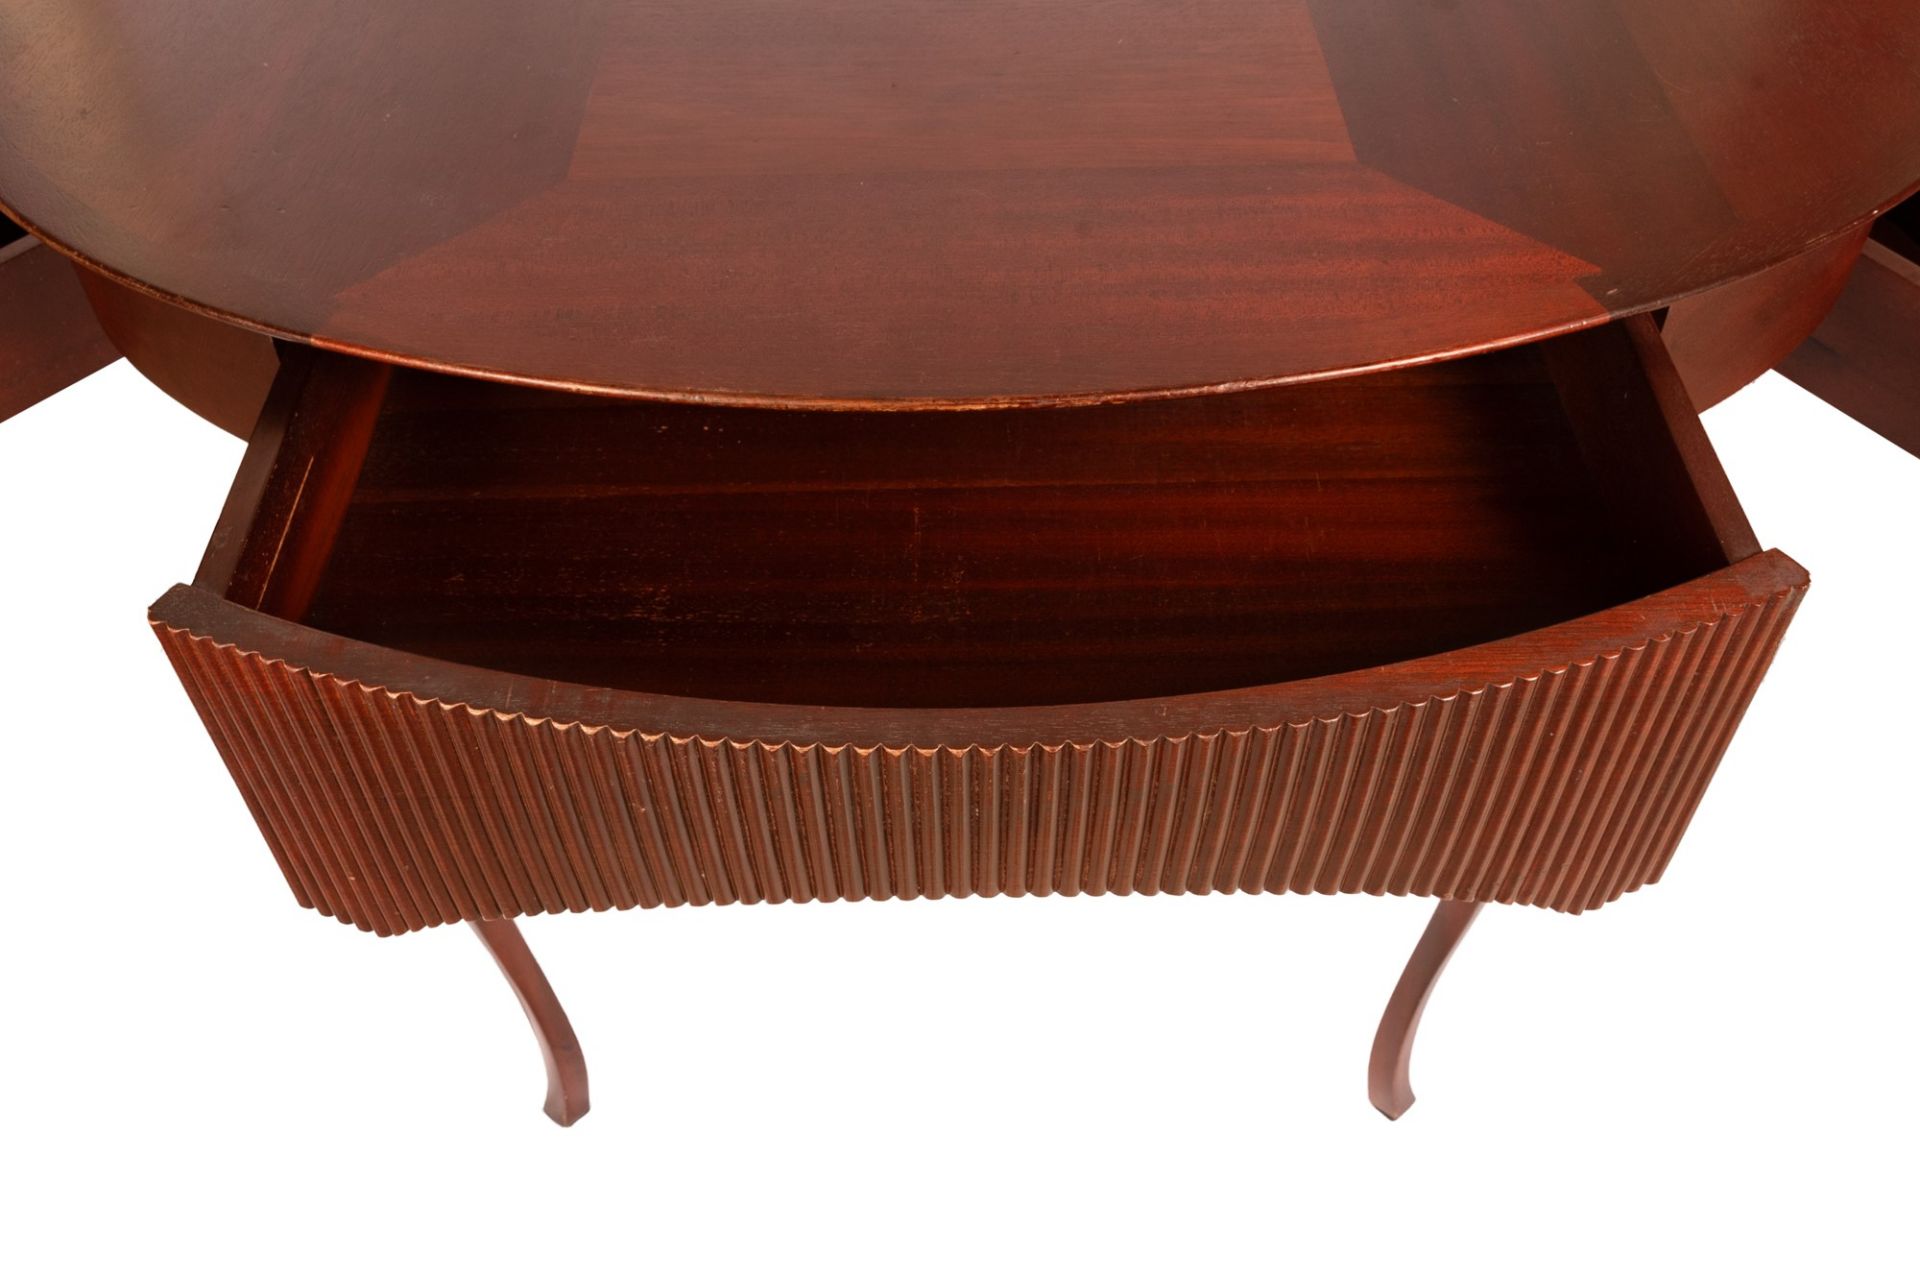 Writing desk in cherry wood - Image 17 of 25